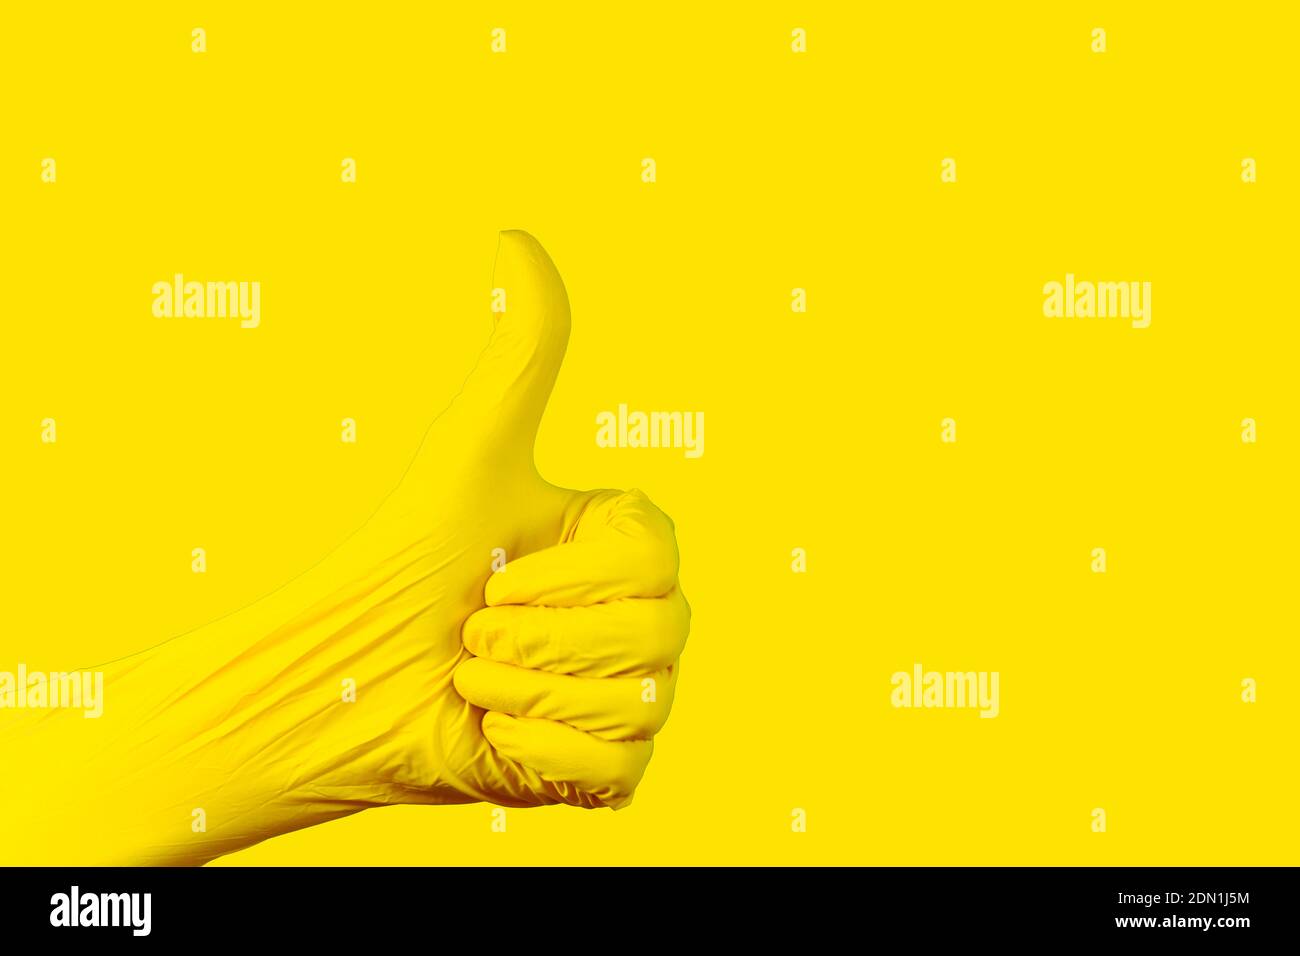 Gesture of a hand thumb up in a nitrile yellow Illuminating glove against a uniform background of the same color. Stock Photo